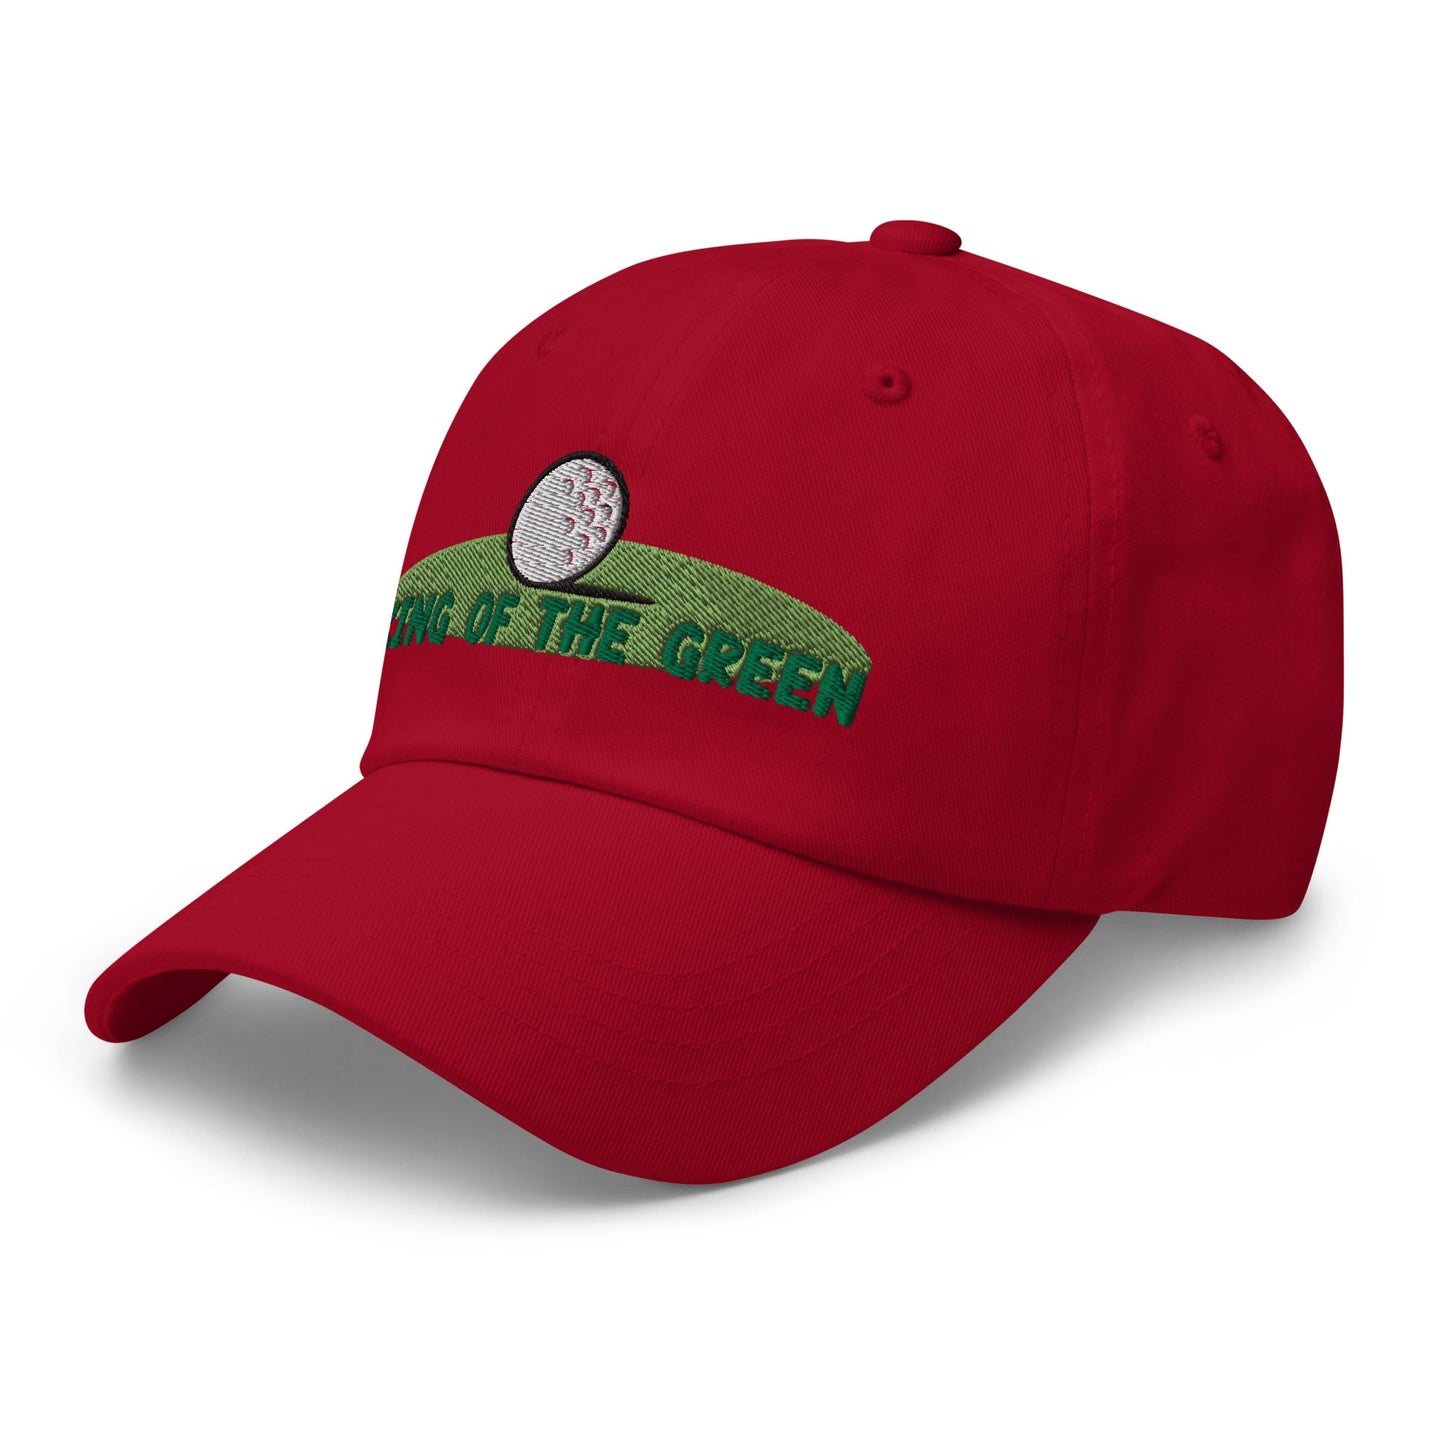 Funny Golfer Gifts  Dad Cap King of the Green Cap